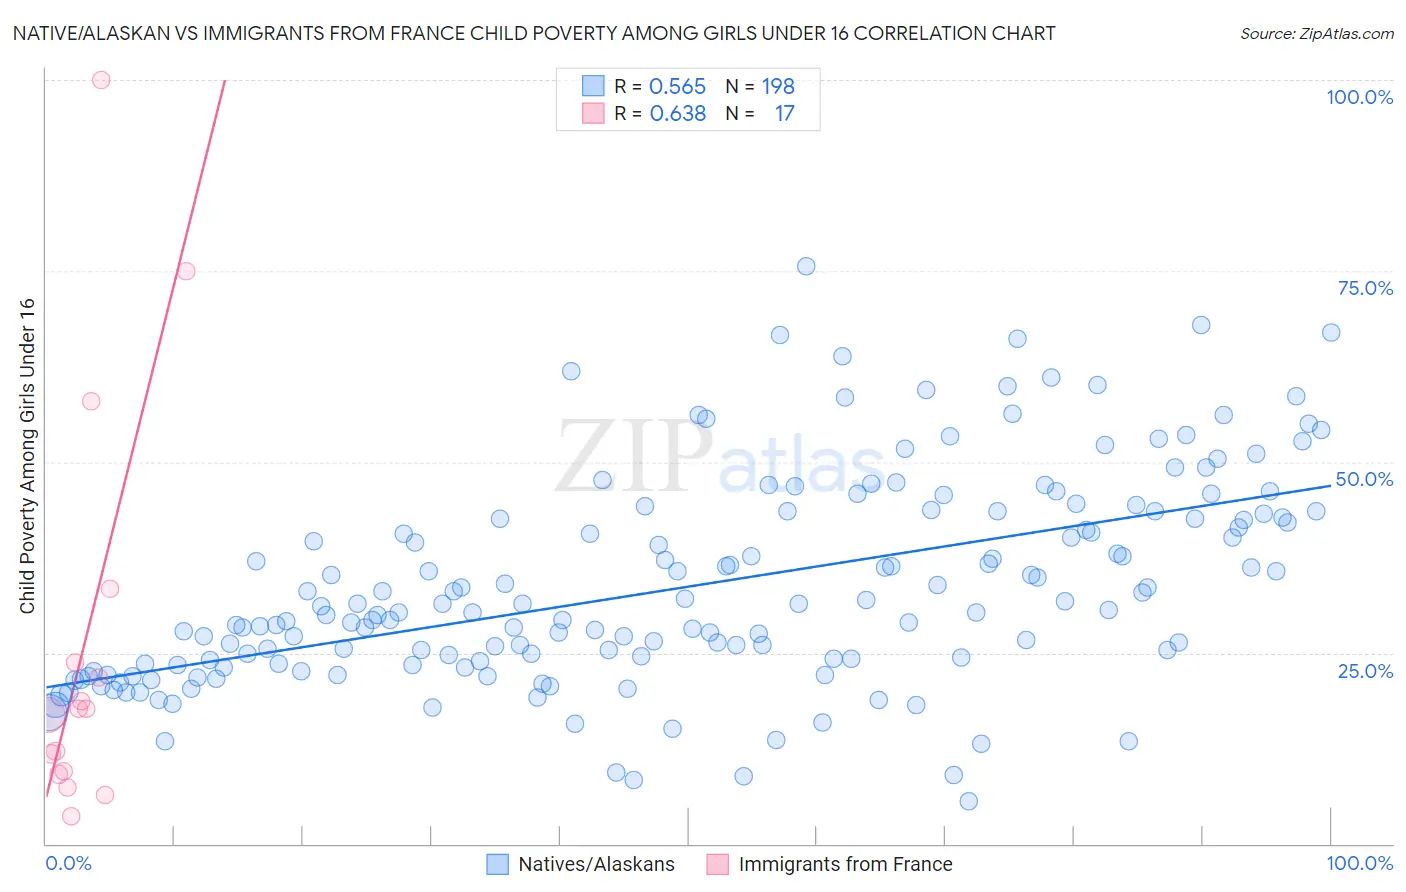 Native/Alaskan vs Immigrants from France Child Poverty Among Girls Under 16